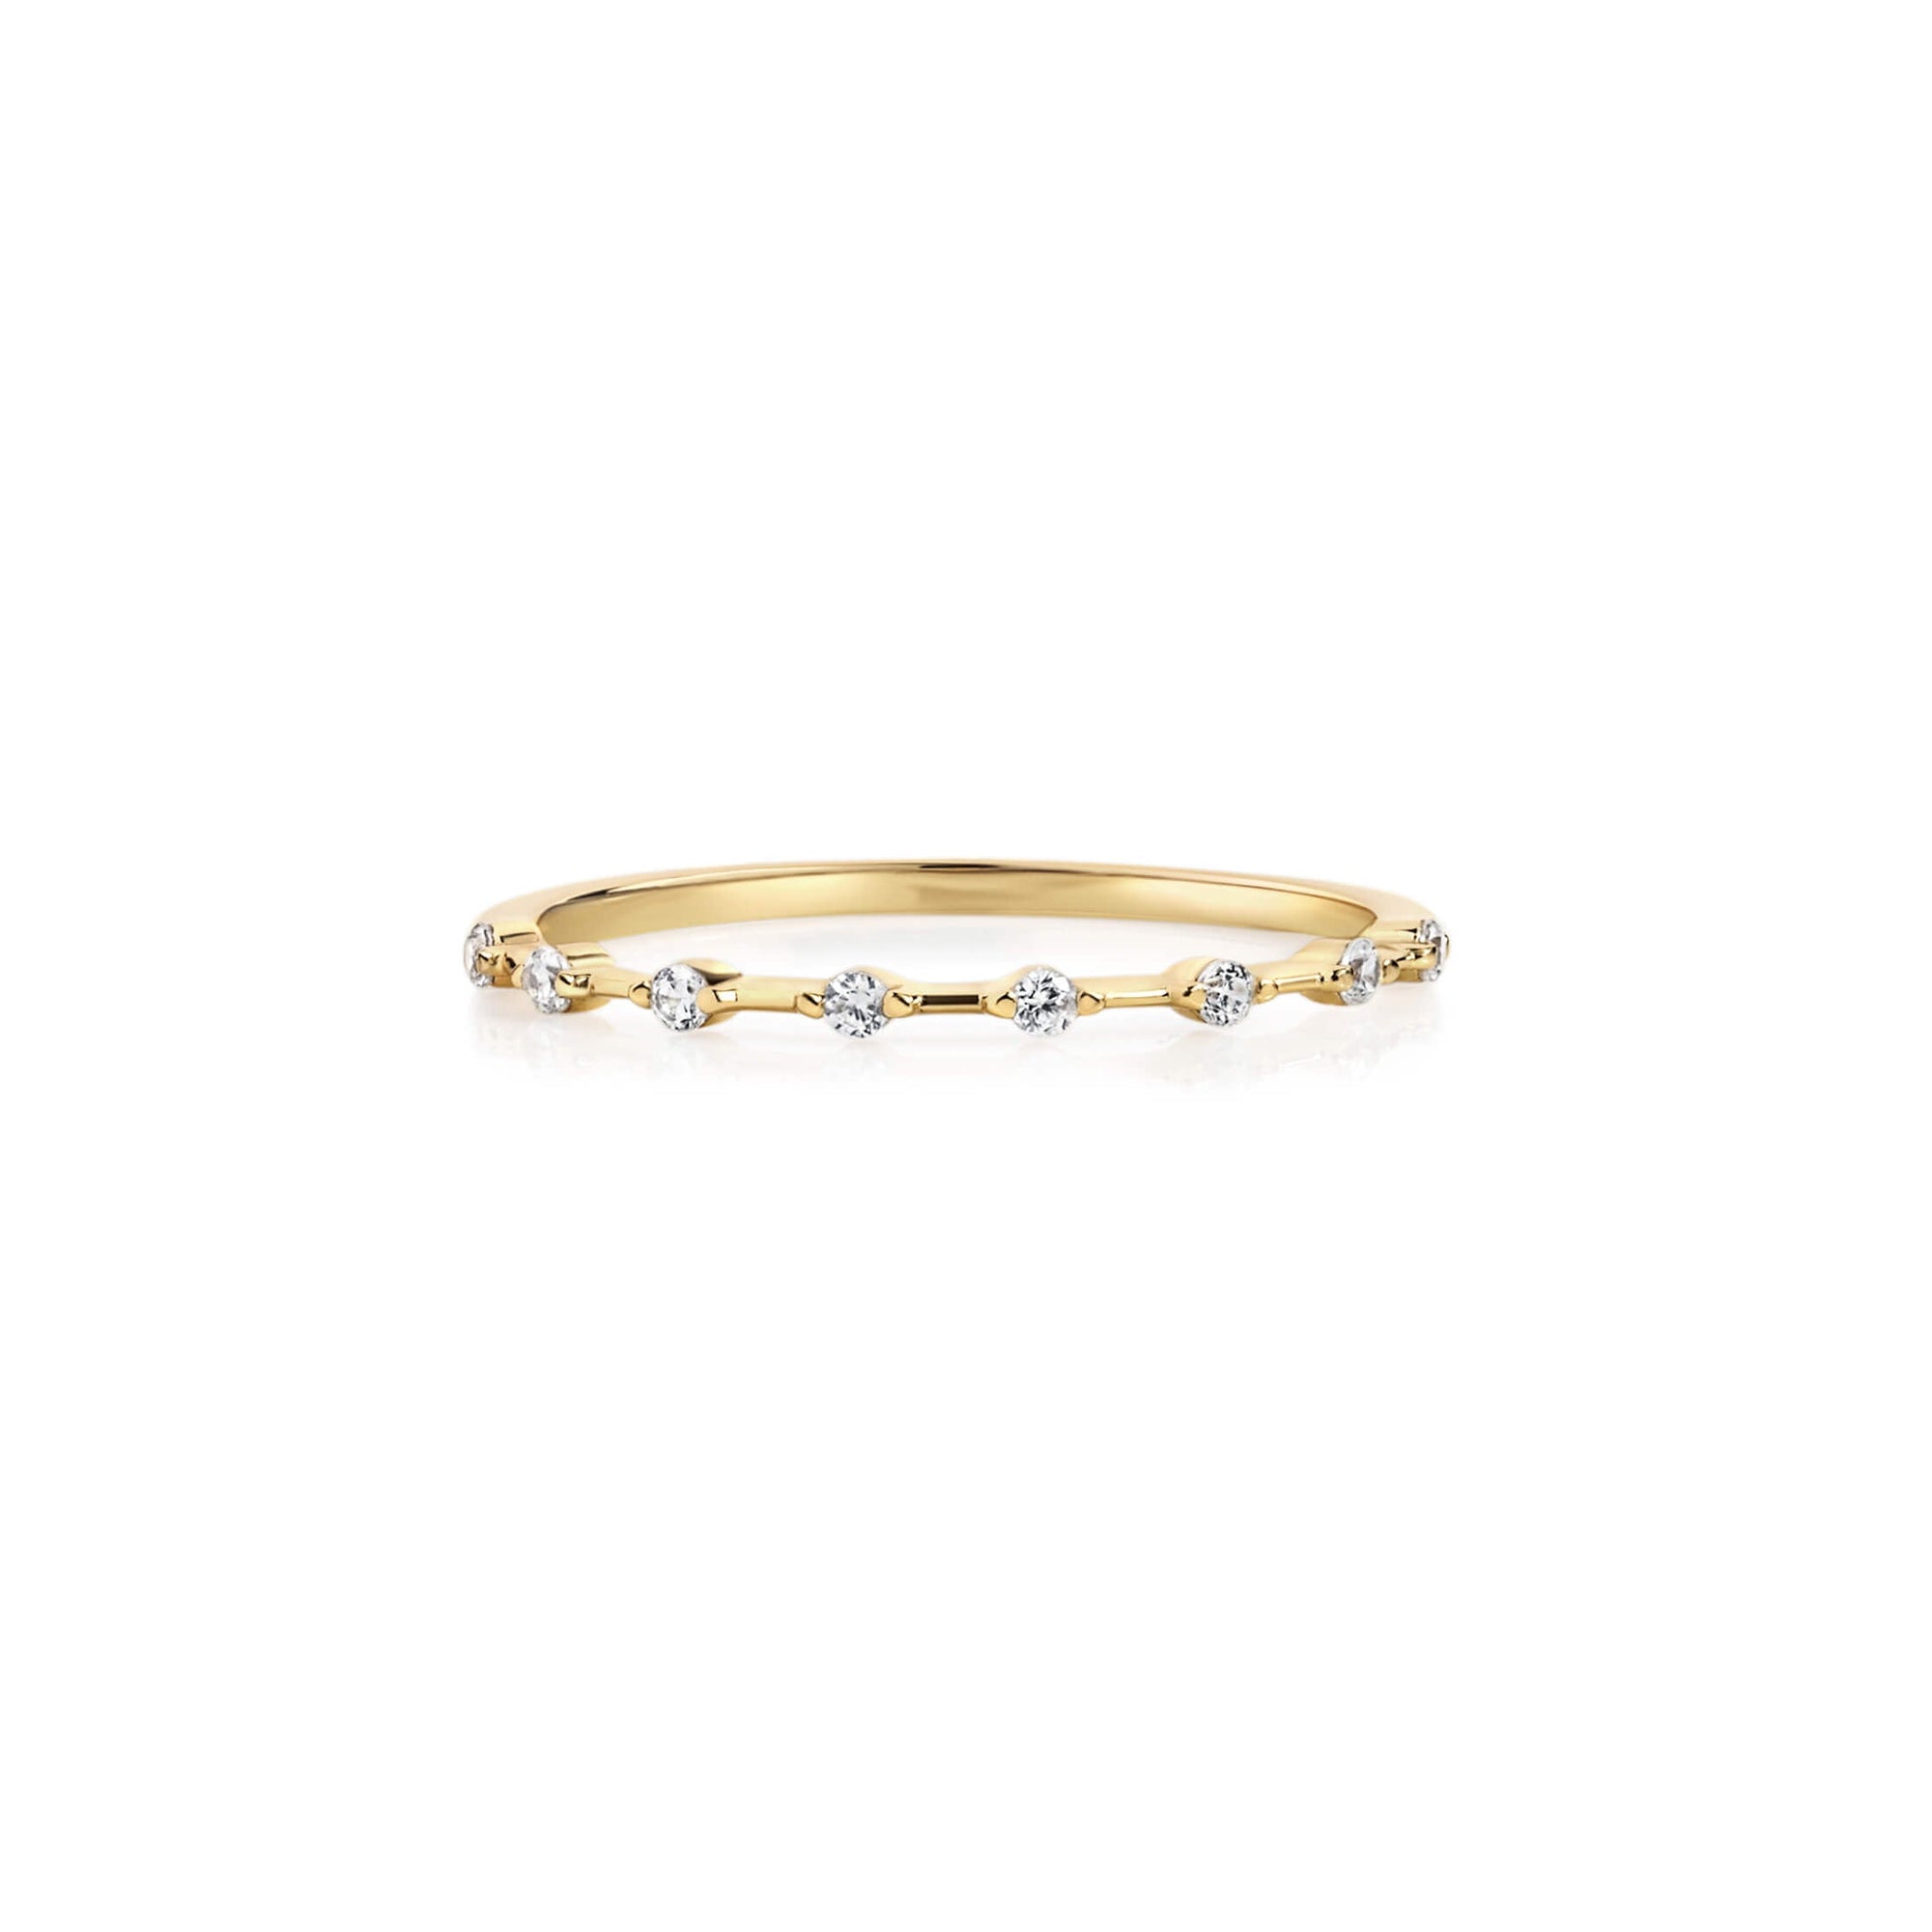 FLOATING ETERNITY BAND - Trove & Co.